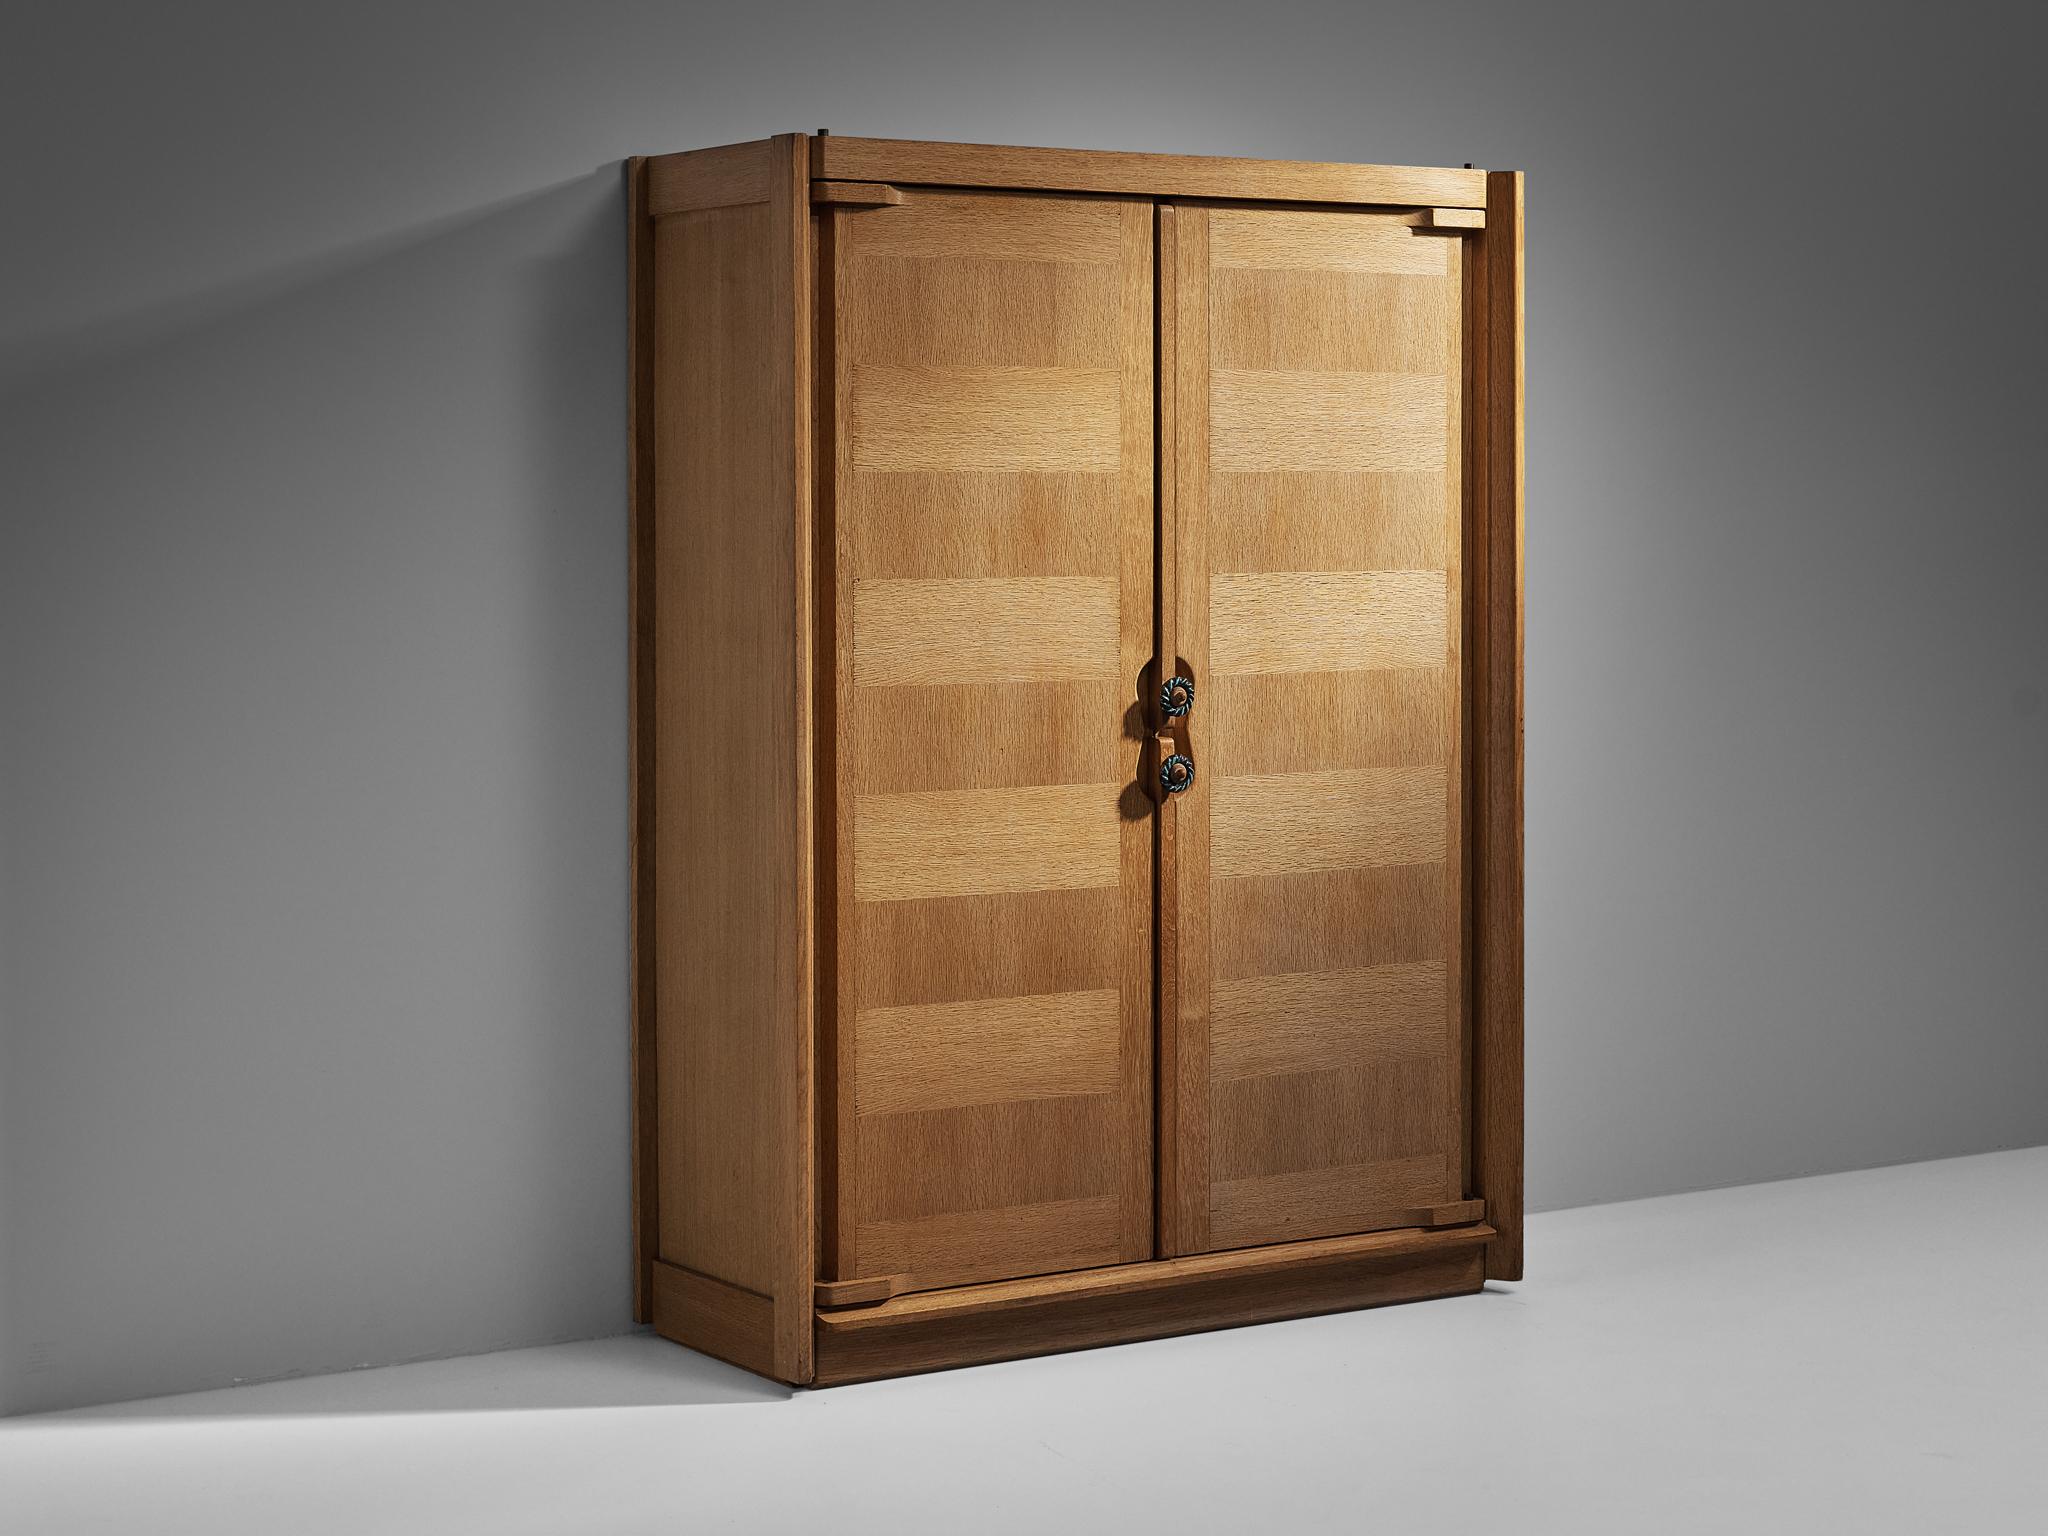 Guillerme et Chambron for Votre Maison, armoire, oak, ceramic, France, 1960s. 

This case piece is designed by Guillerme and Chambron and features geometric oak inlays, which is characteristic for the French duo. The wardrobe is equipped with